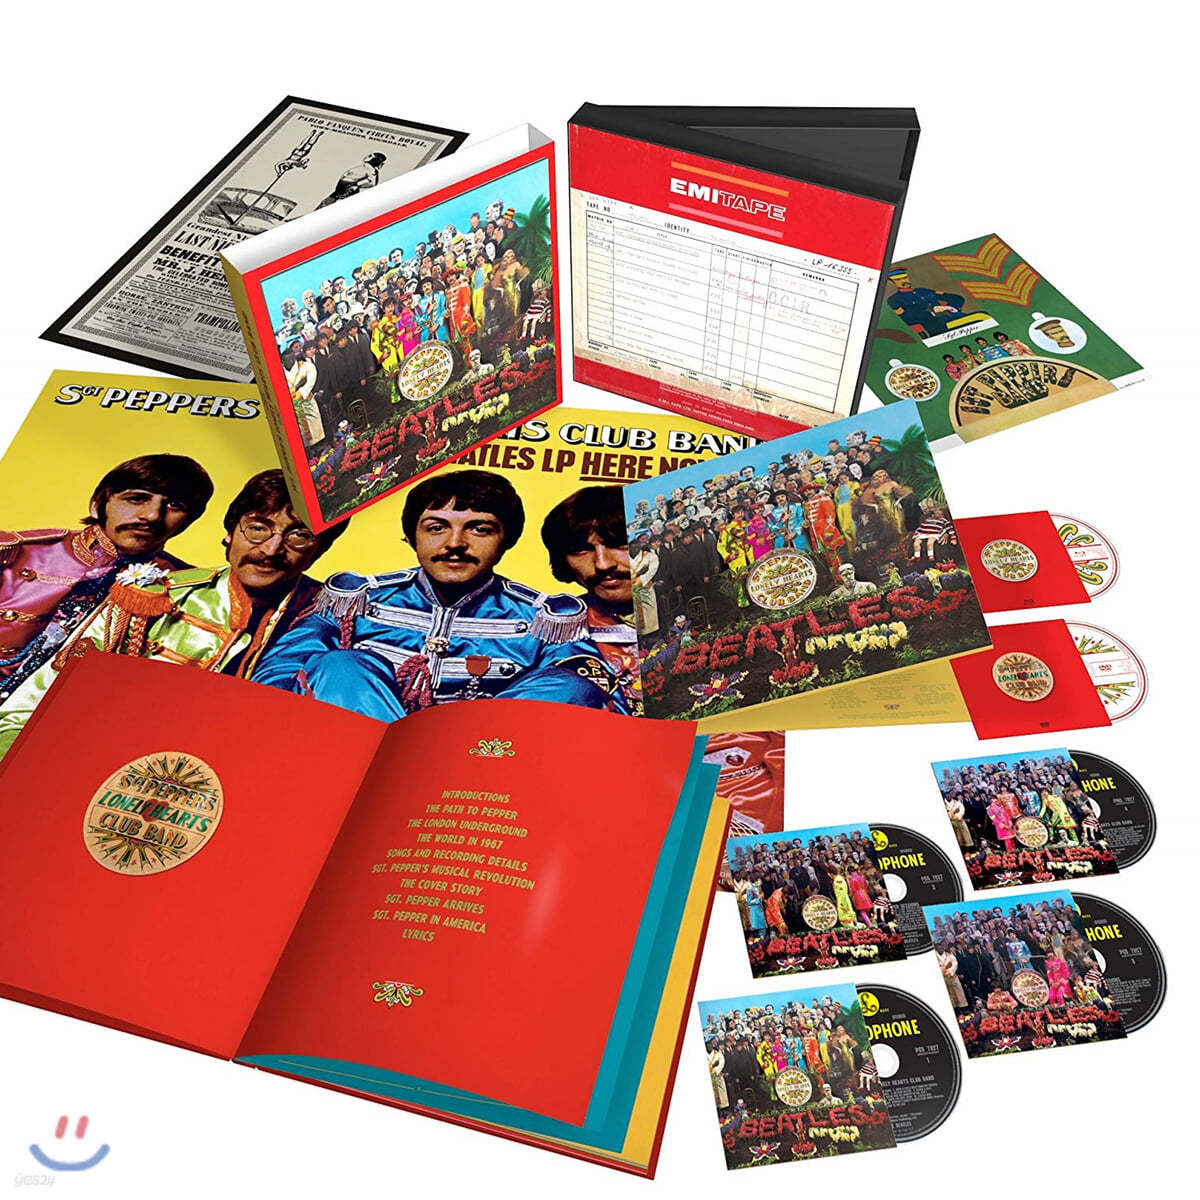 The Beatles (비틀즈) - Sgt. Pepper's Lonely Hearts Club Band [발매 50주년 기념 Super Deluxe Limited Edition]